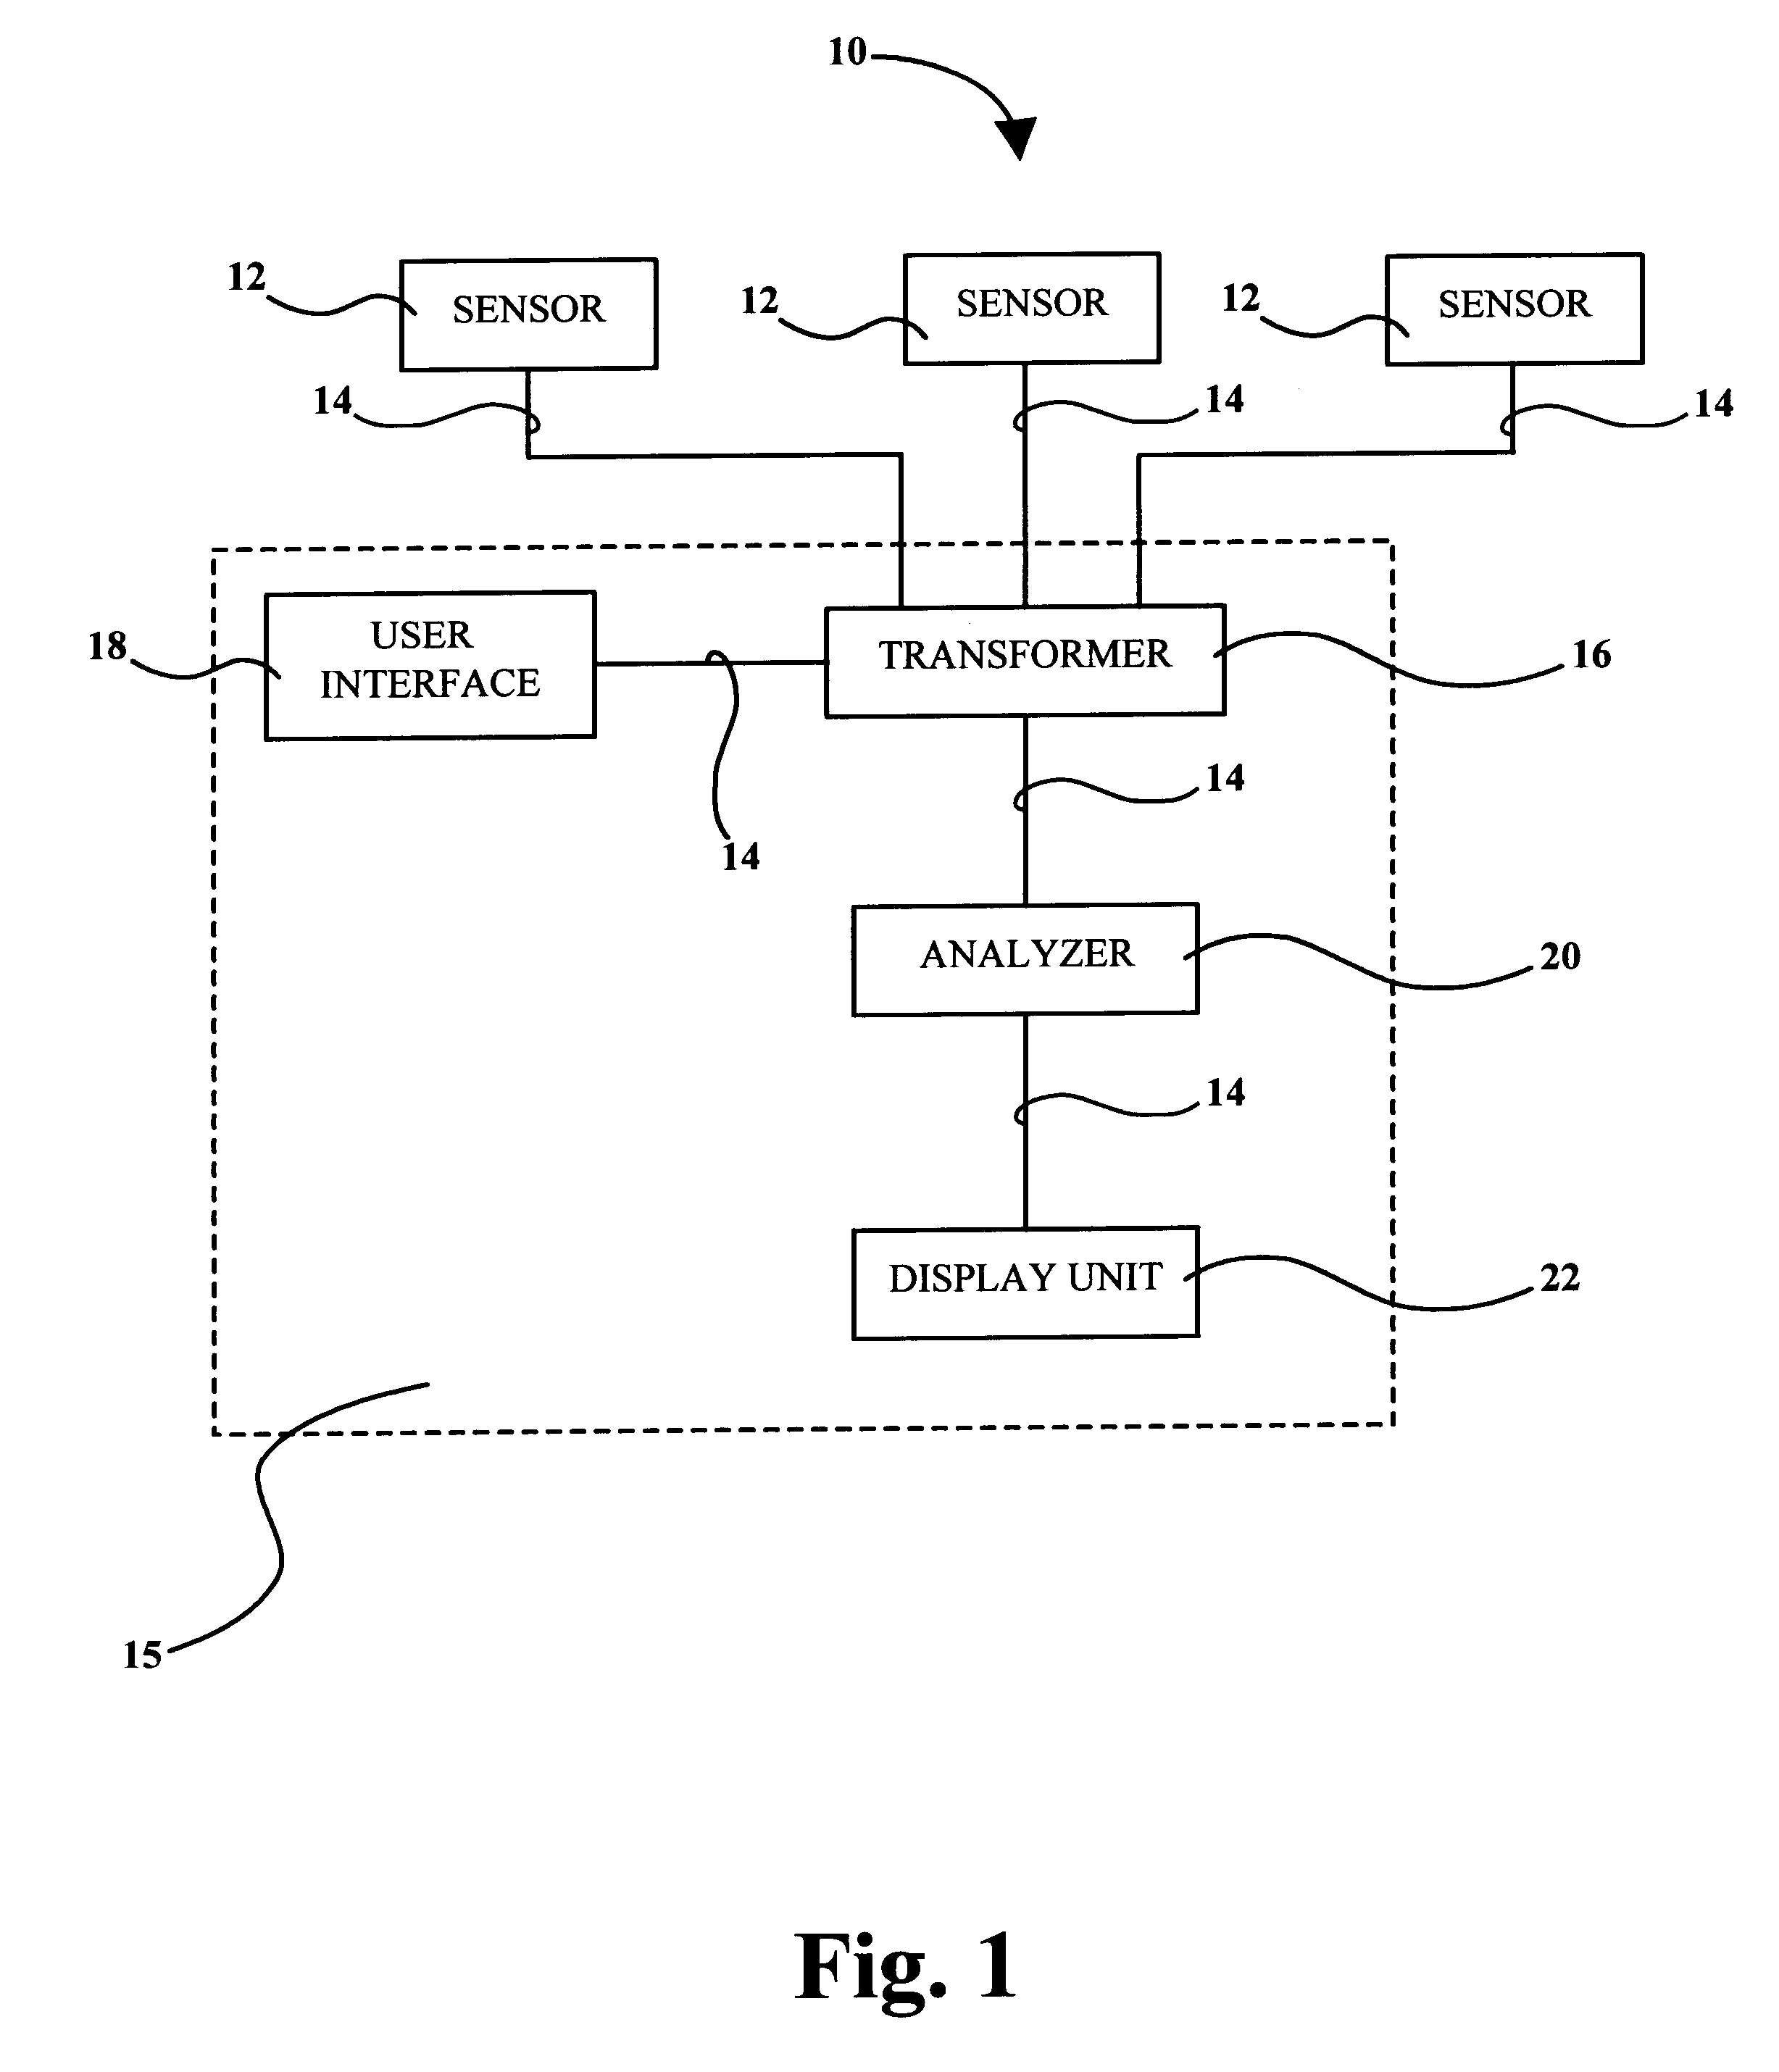 Apparatus and method for monitoring a system and displaying the status of the system